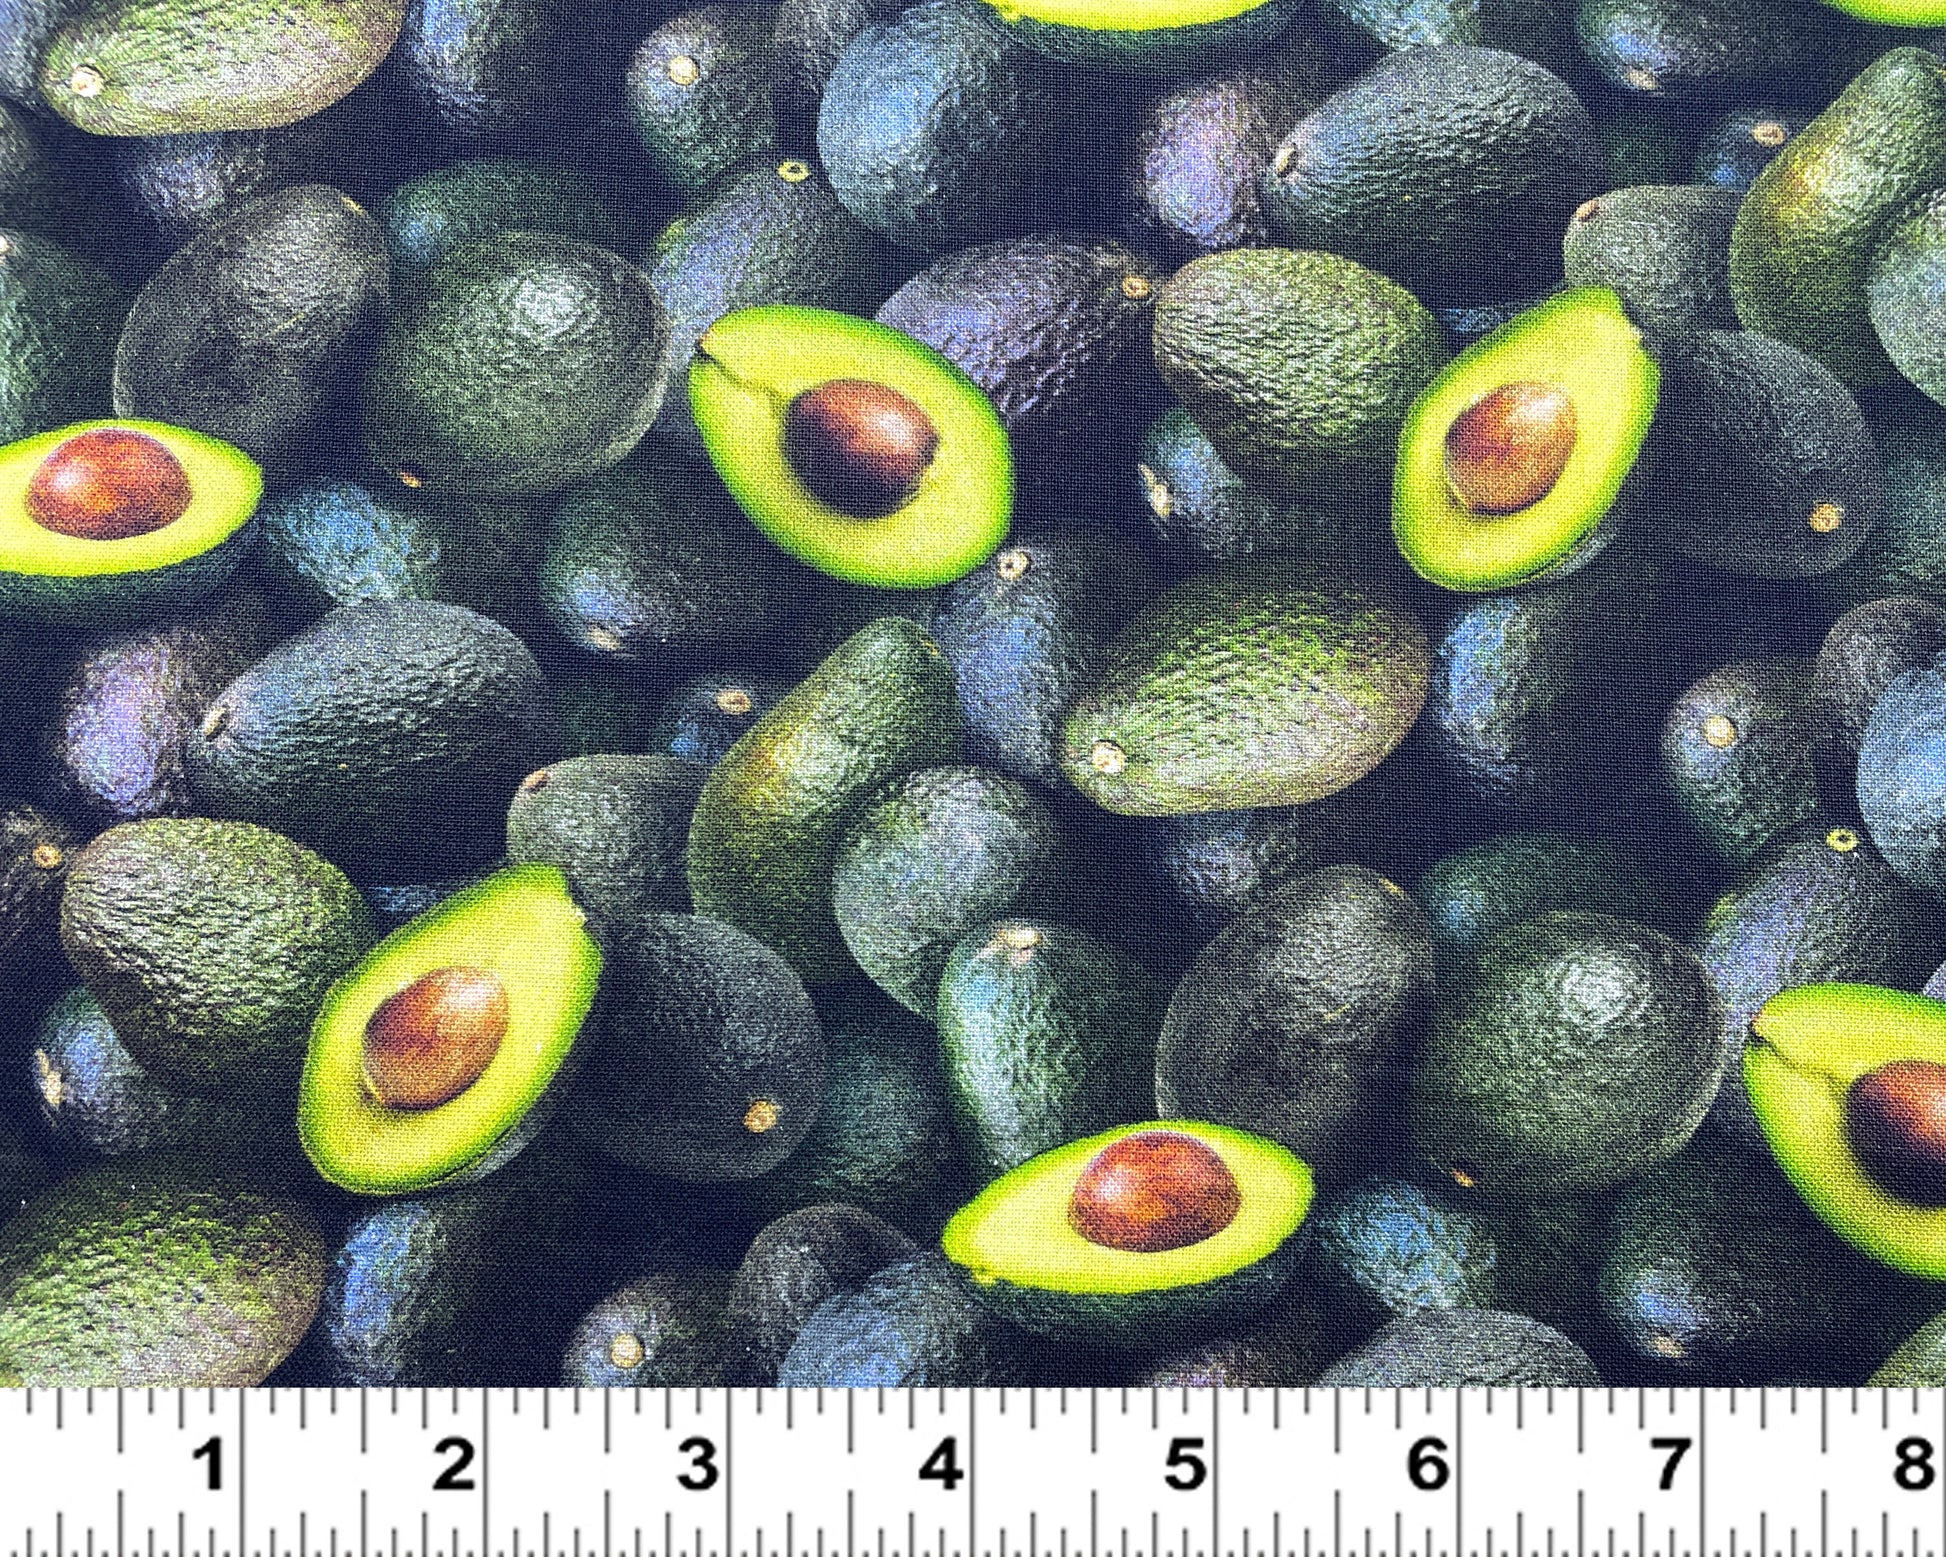 Avocado Fabric - Food Festival collection by Elizabeth Studios - 100% Cotton Fabric - Food theme Guacamole Mexican Food - Ships NEXT DAY